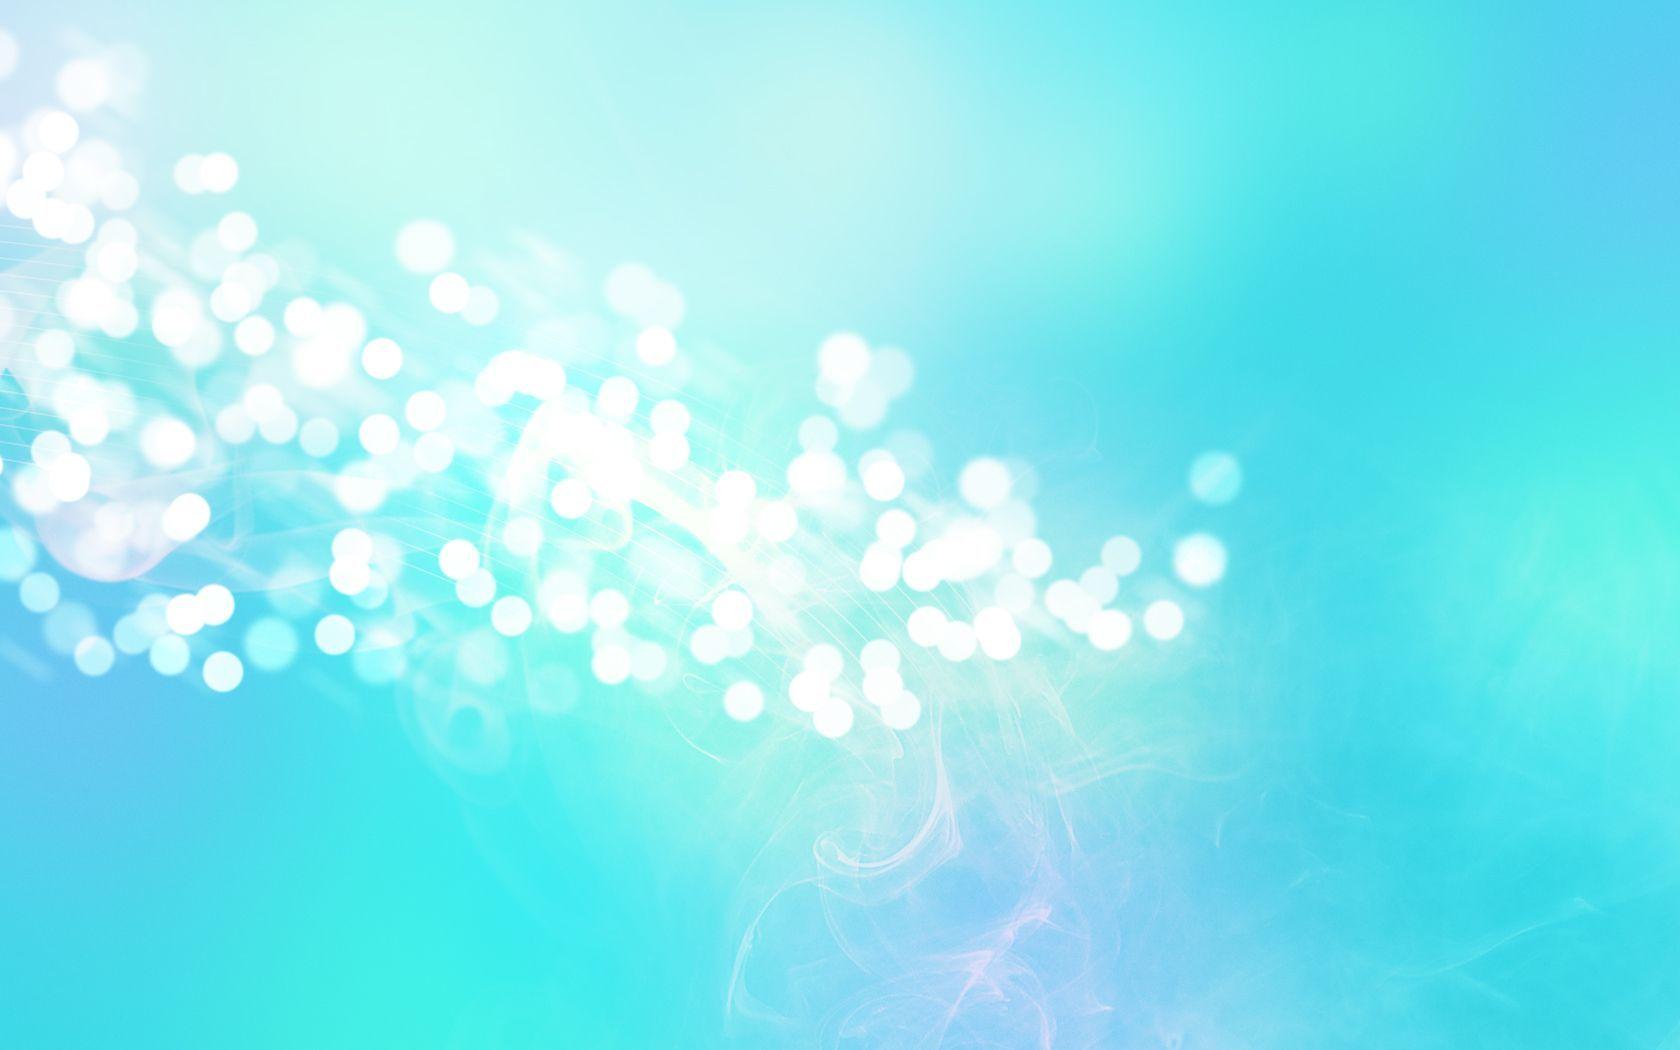 Turquoise Blue Wallpaper 7369 Background. Widebackground